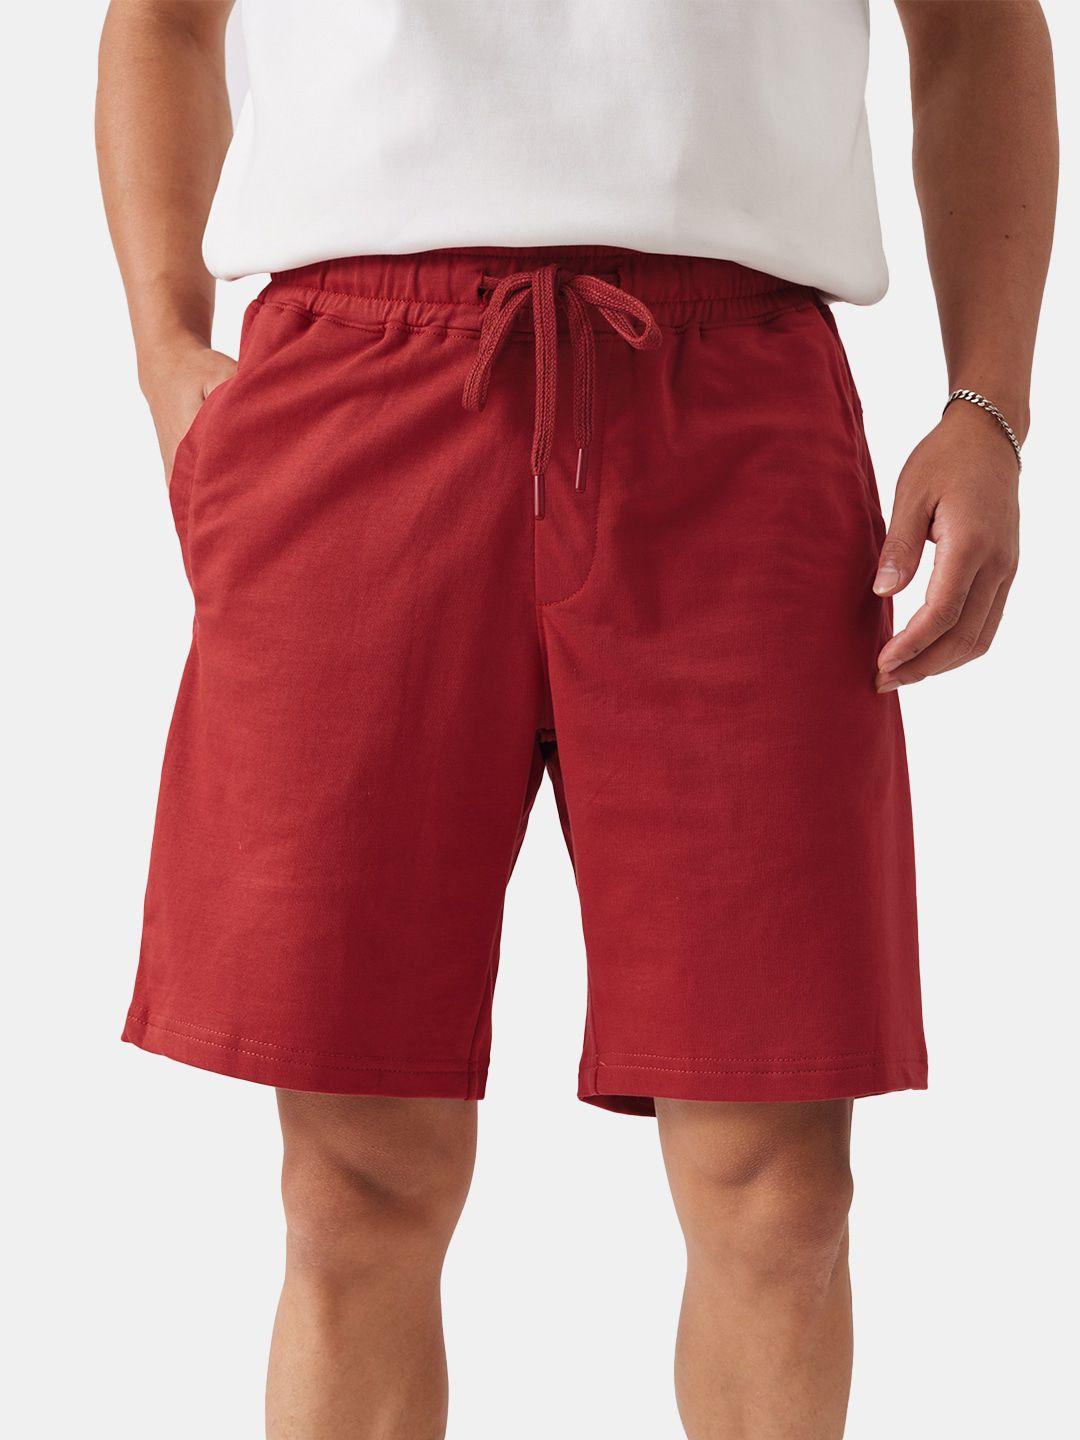 the-souled-store-men-red-mid-rise-shorts